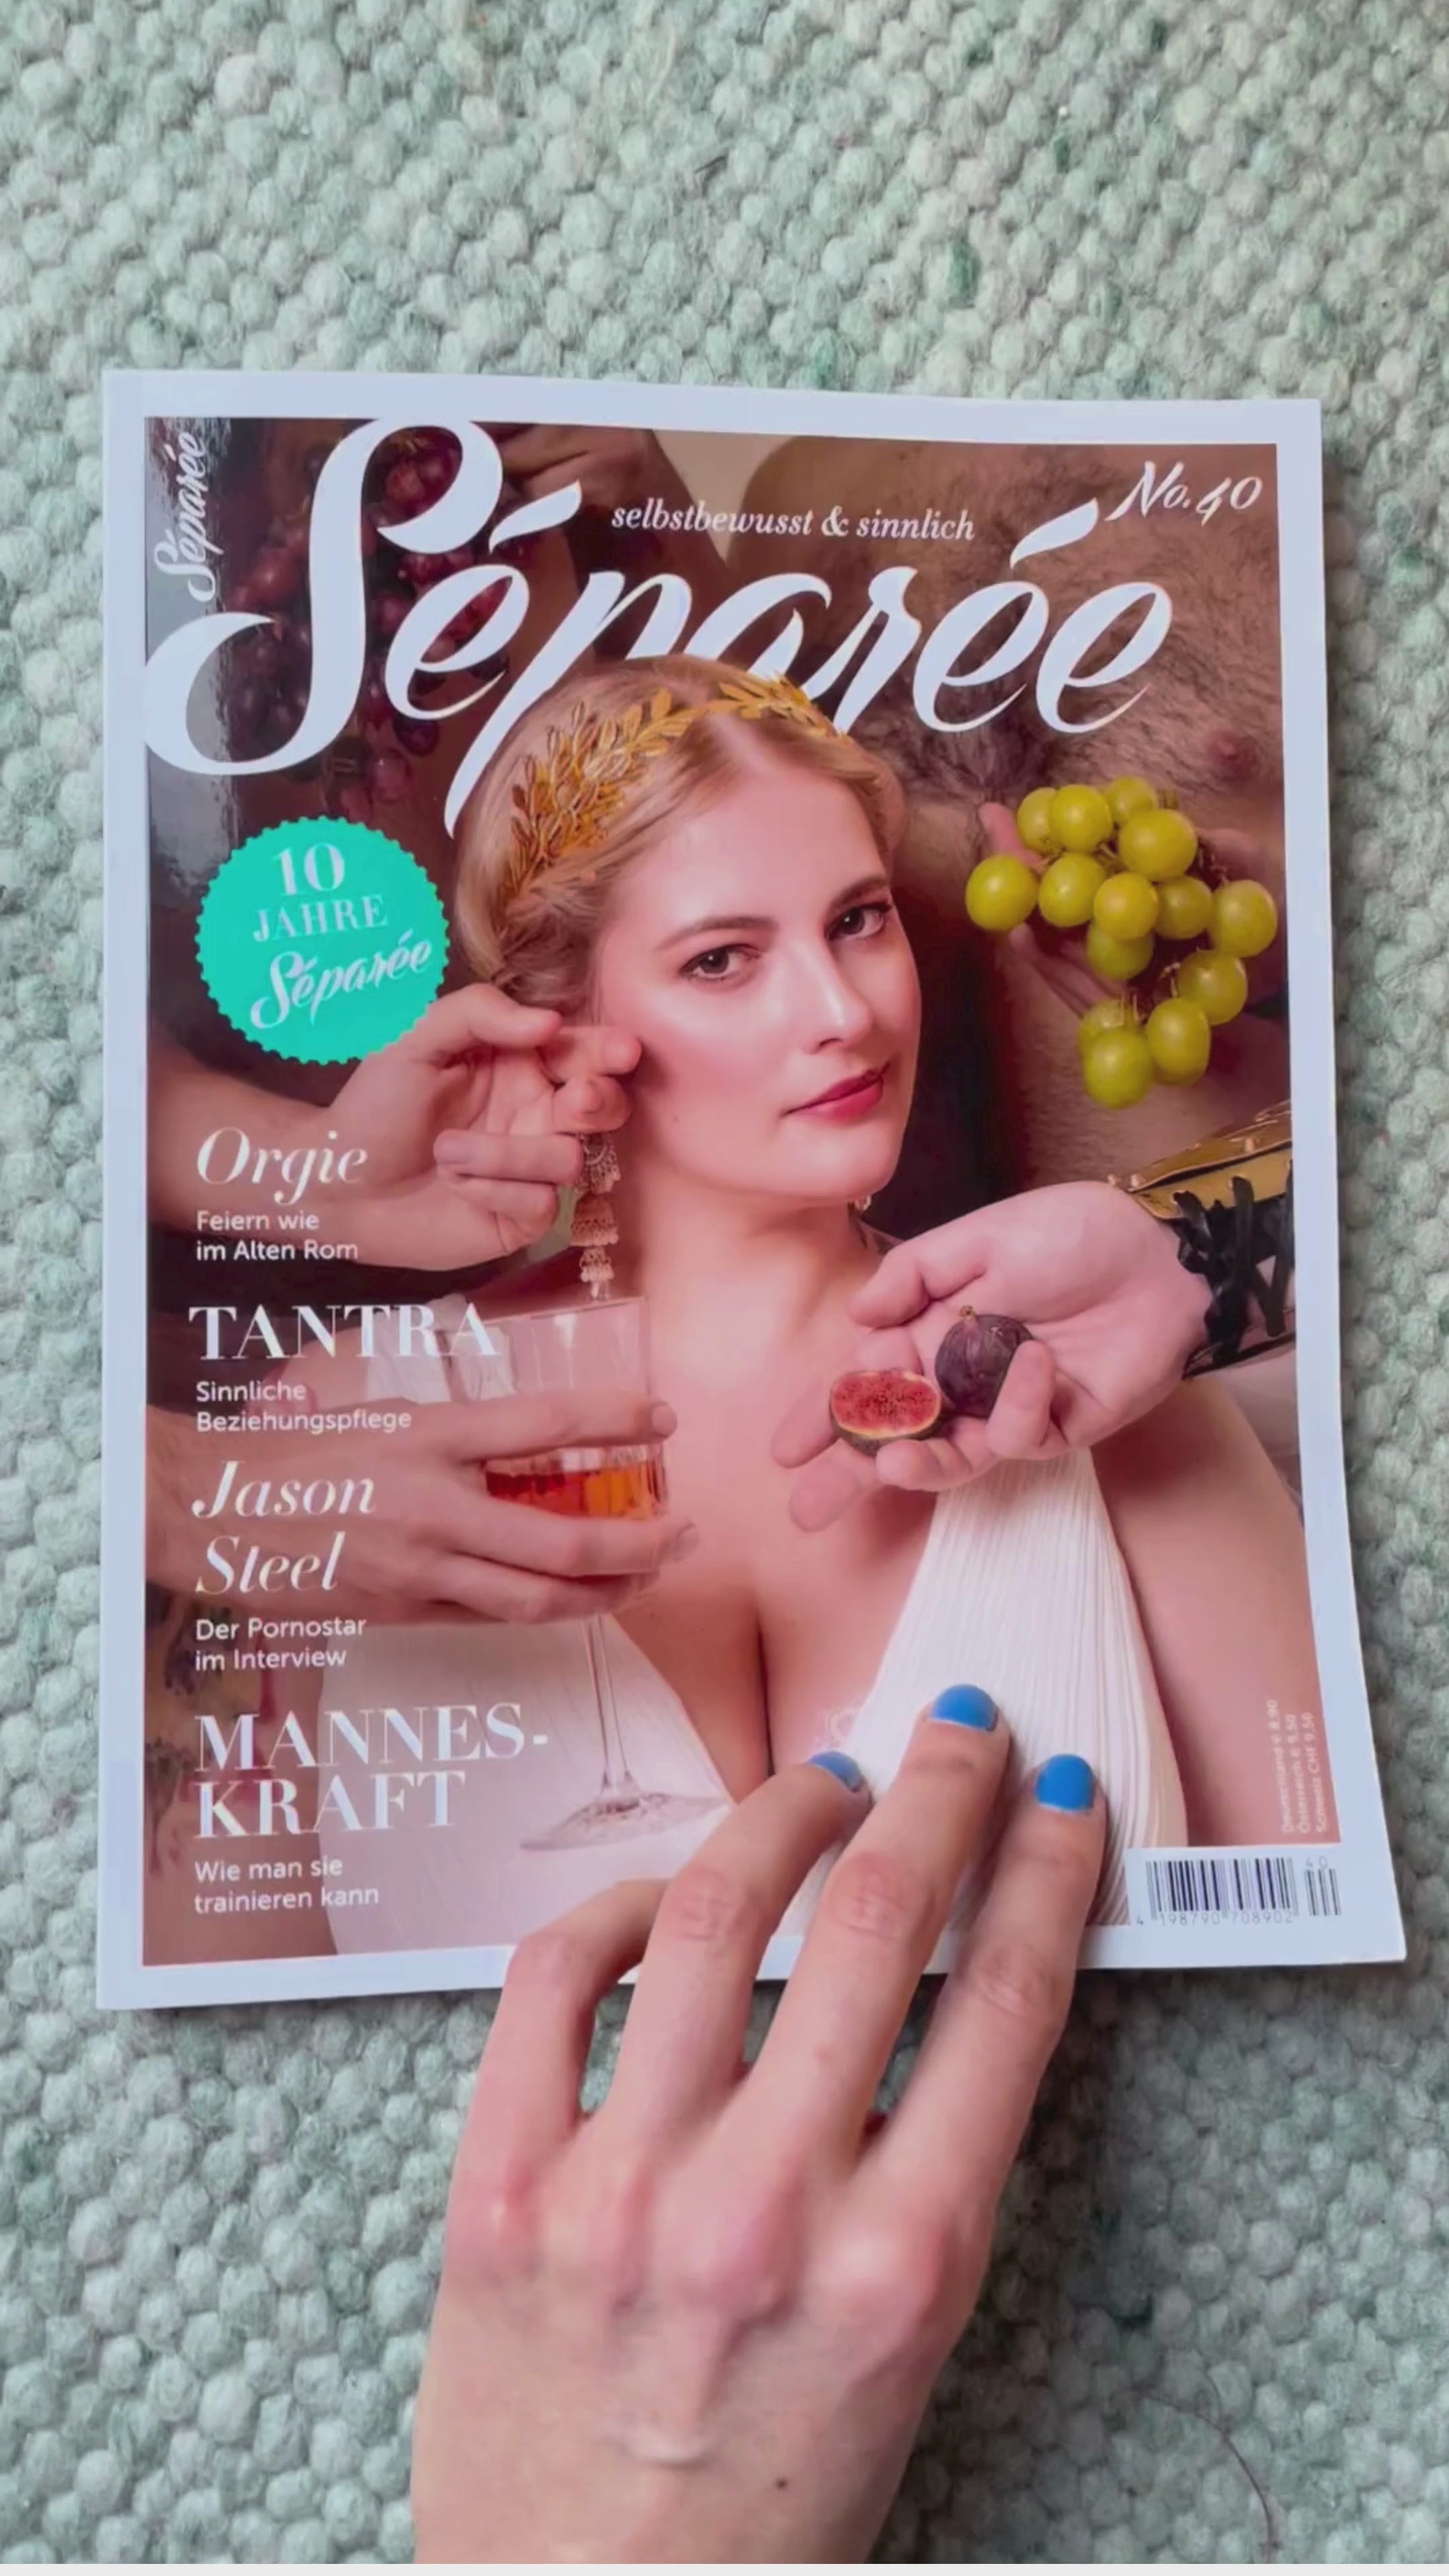 Load video: Separee Magazine is opened and a display of all soaps is shown